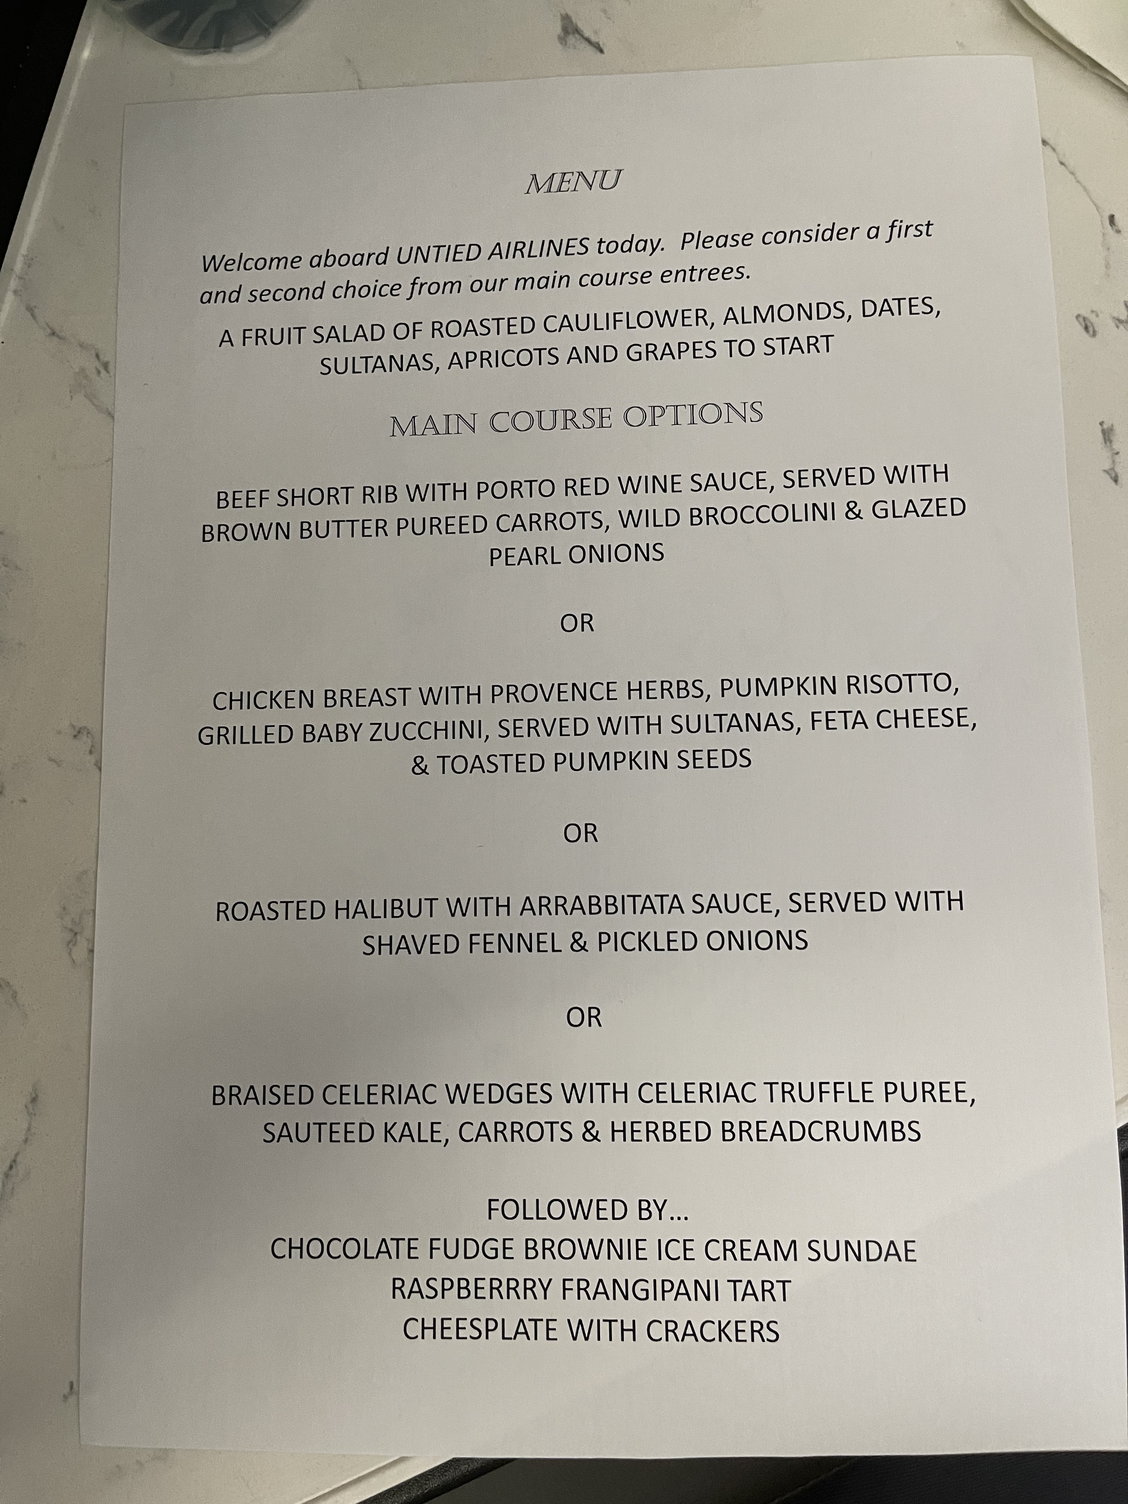 United Airlines Business Class Menu Typo Is Delicious Irony Live and